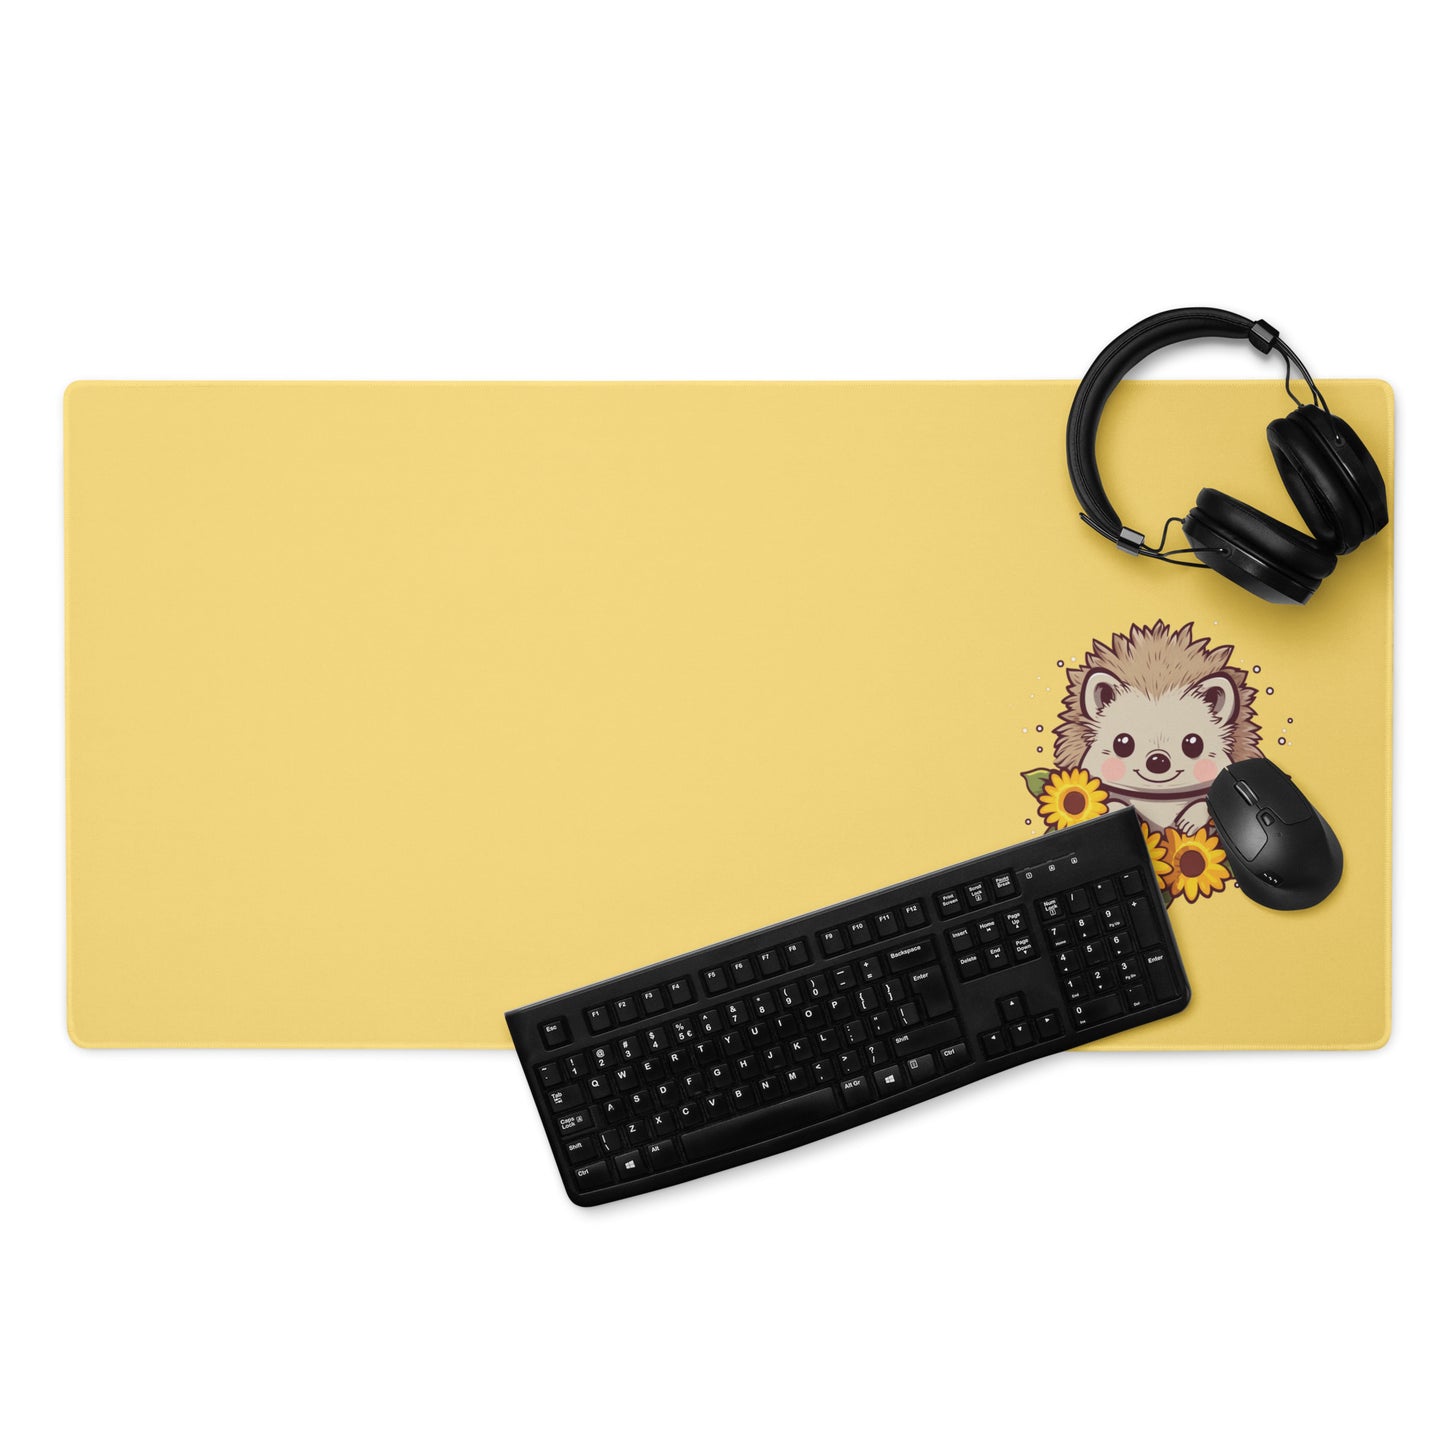 A 36" x 18" desk pad with a cute hedgehog surrounded by sunflowers on it displayed with a keyboard, headphones and a mouse. Yellow in color.